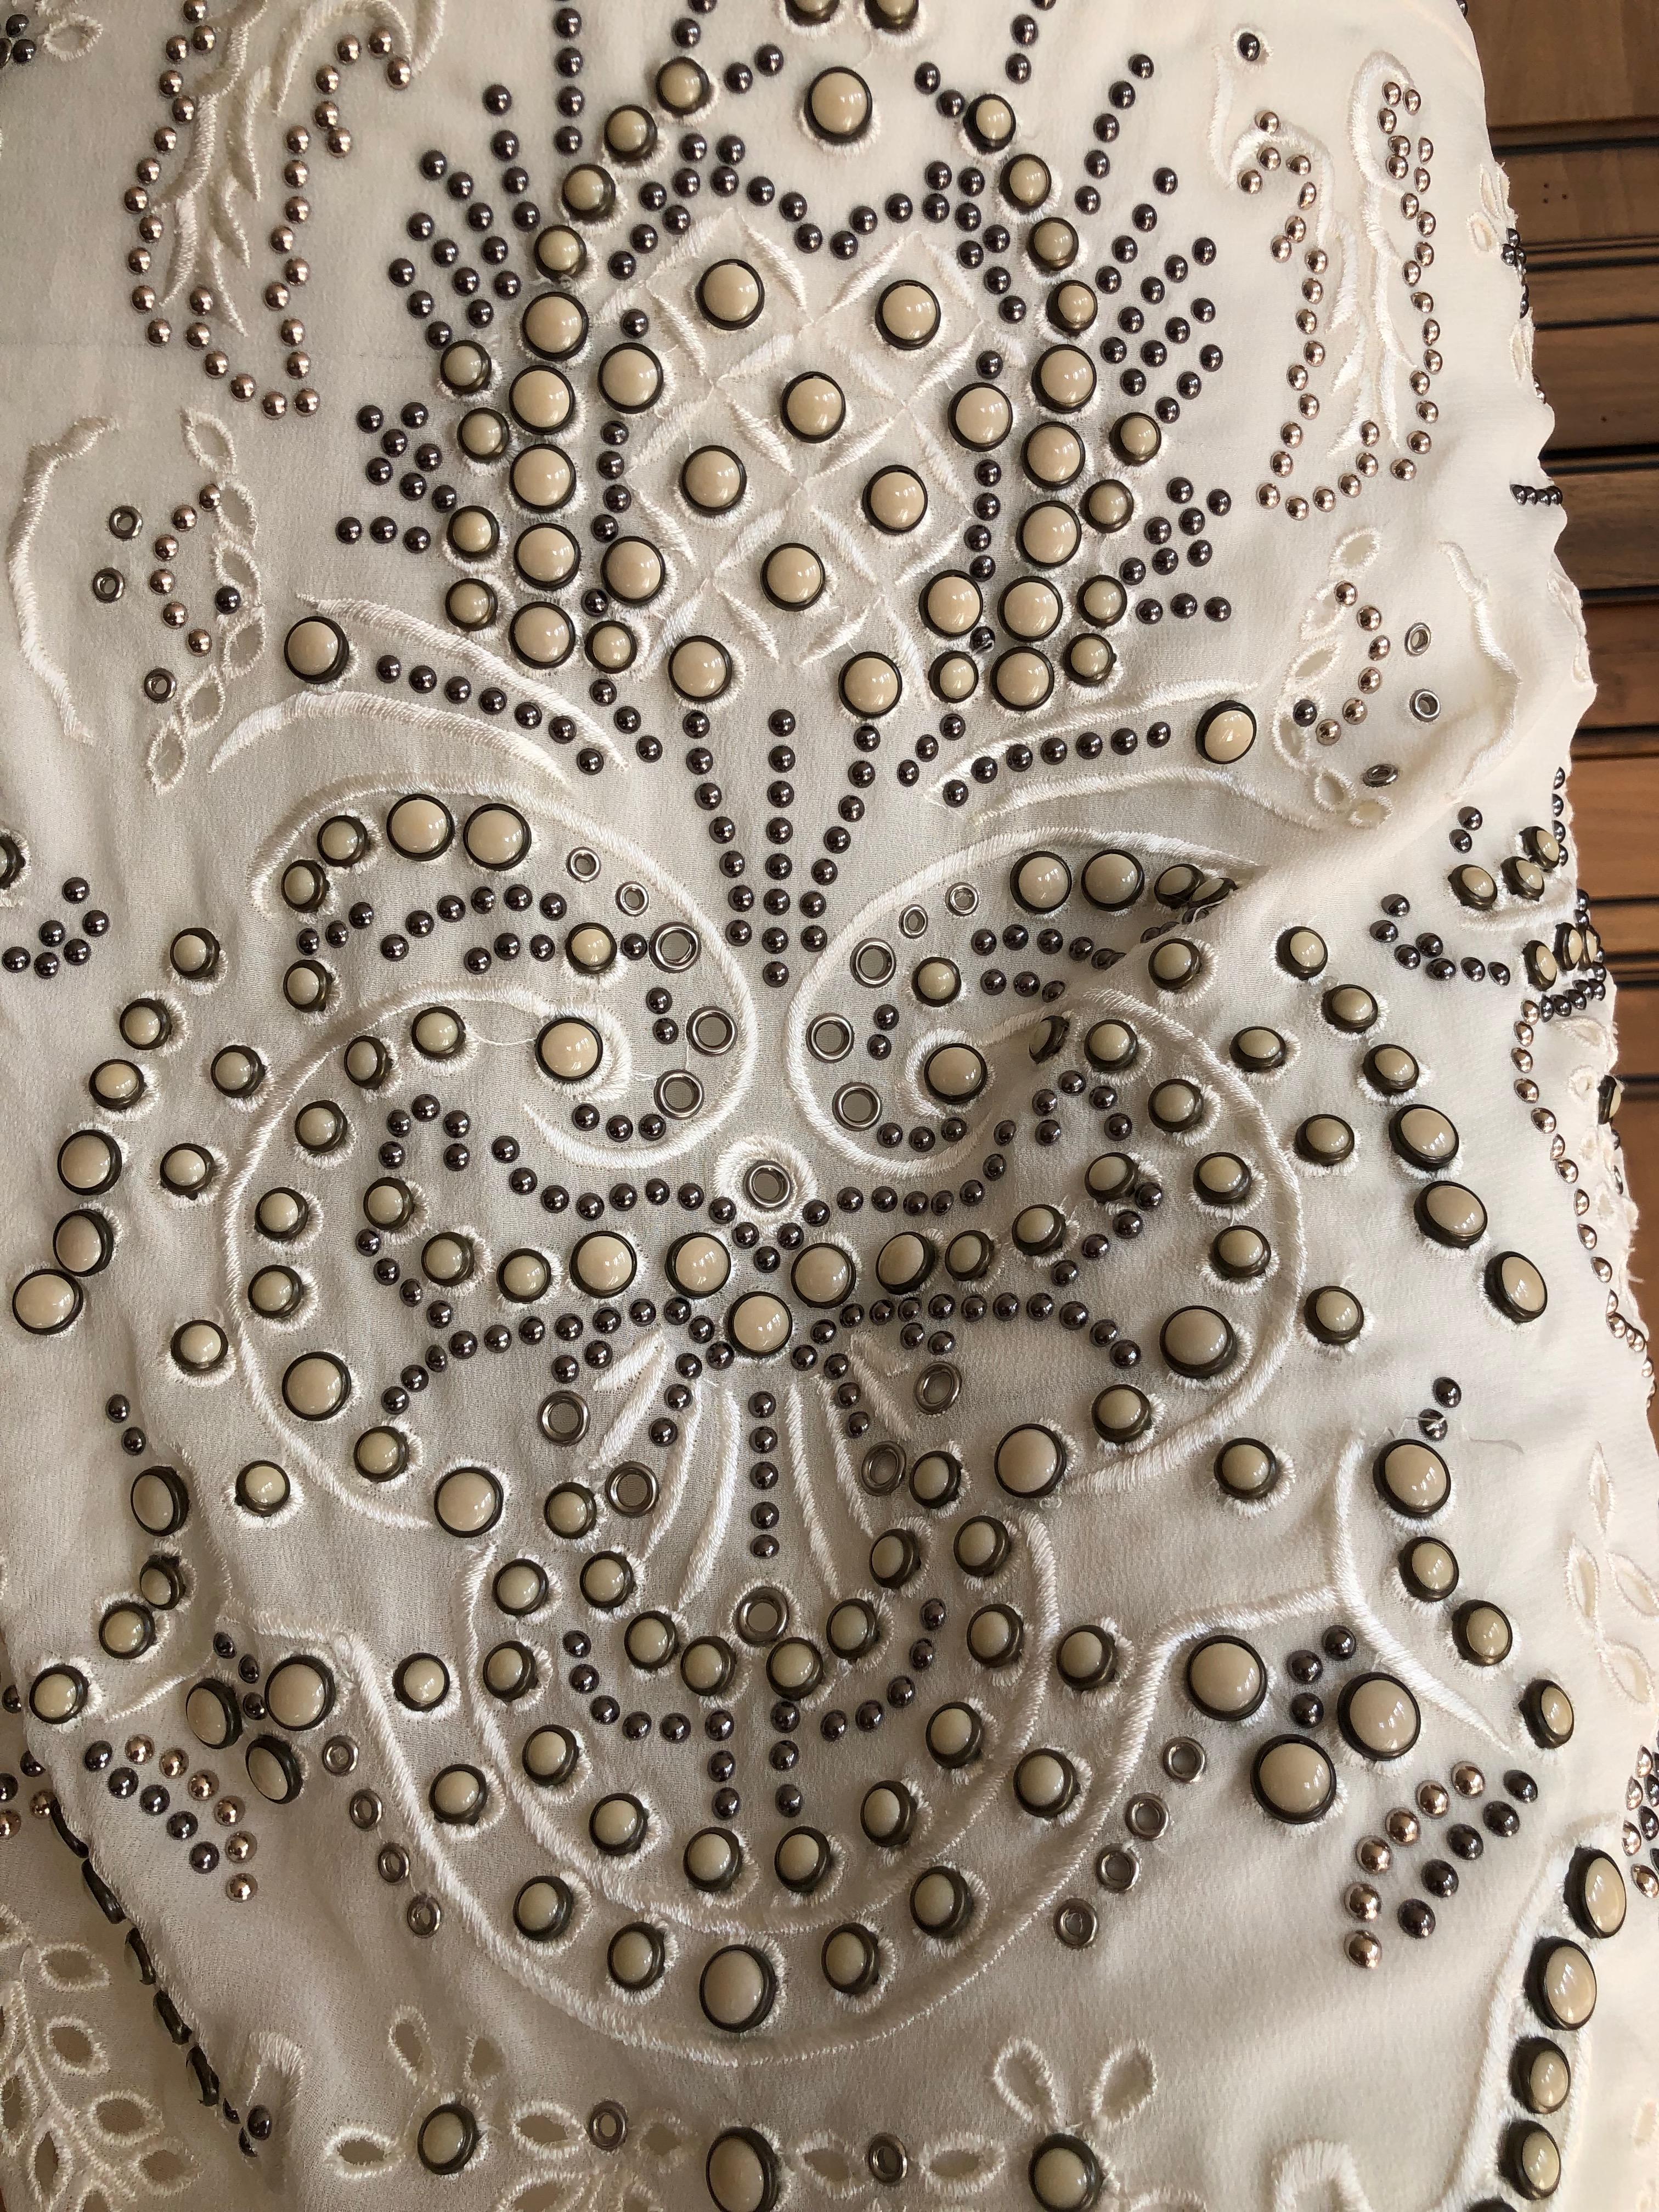 Roberto Cavalli Vintage Stud and Bezel Set Cabachon Embellished Skirt .
This is amazing, the hand work is incredible.
Please use the zoom feature to see the details
Size tag missing, it is a large or extra large, please check the measurements
Waist